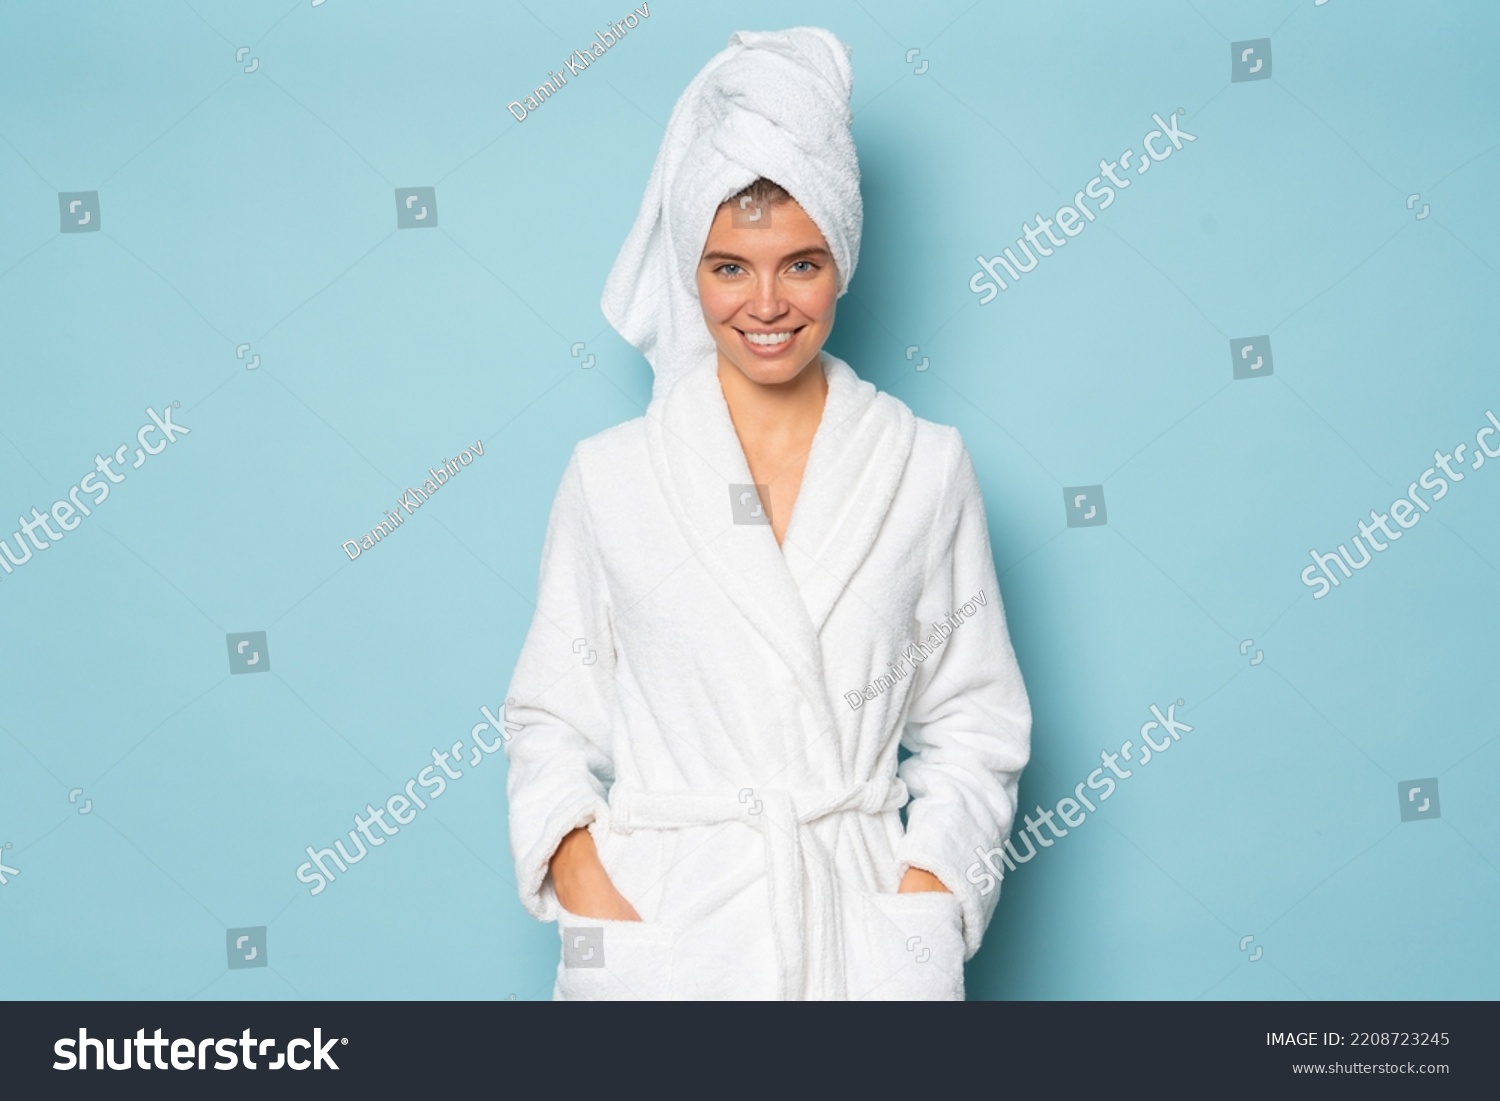 Smiling woman with clean body wearing white bathrobe and towel on head standing on blue studio background with hands in pocket at spa day on vacation or weekend. Hygiene, purity concept #2208723245